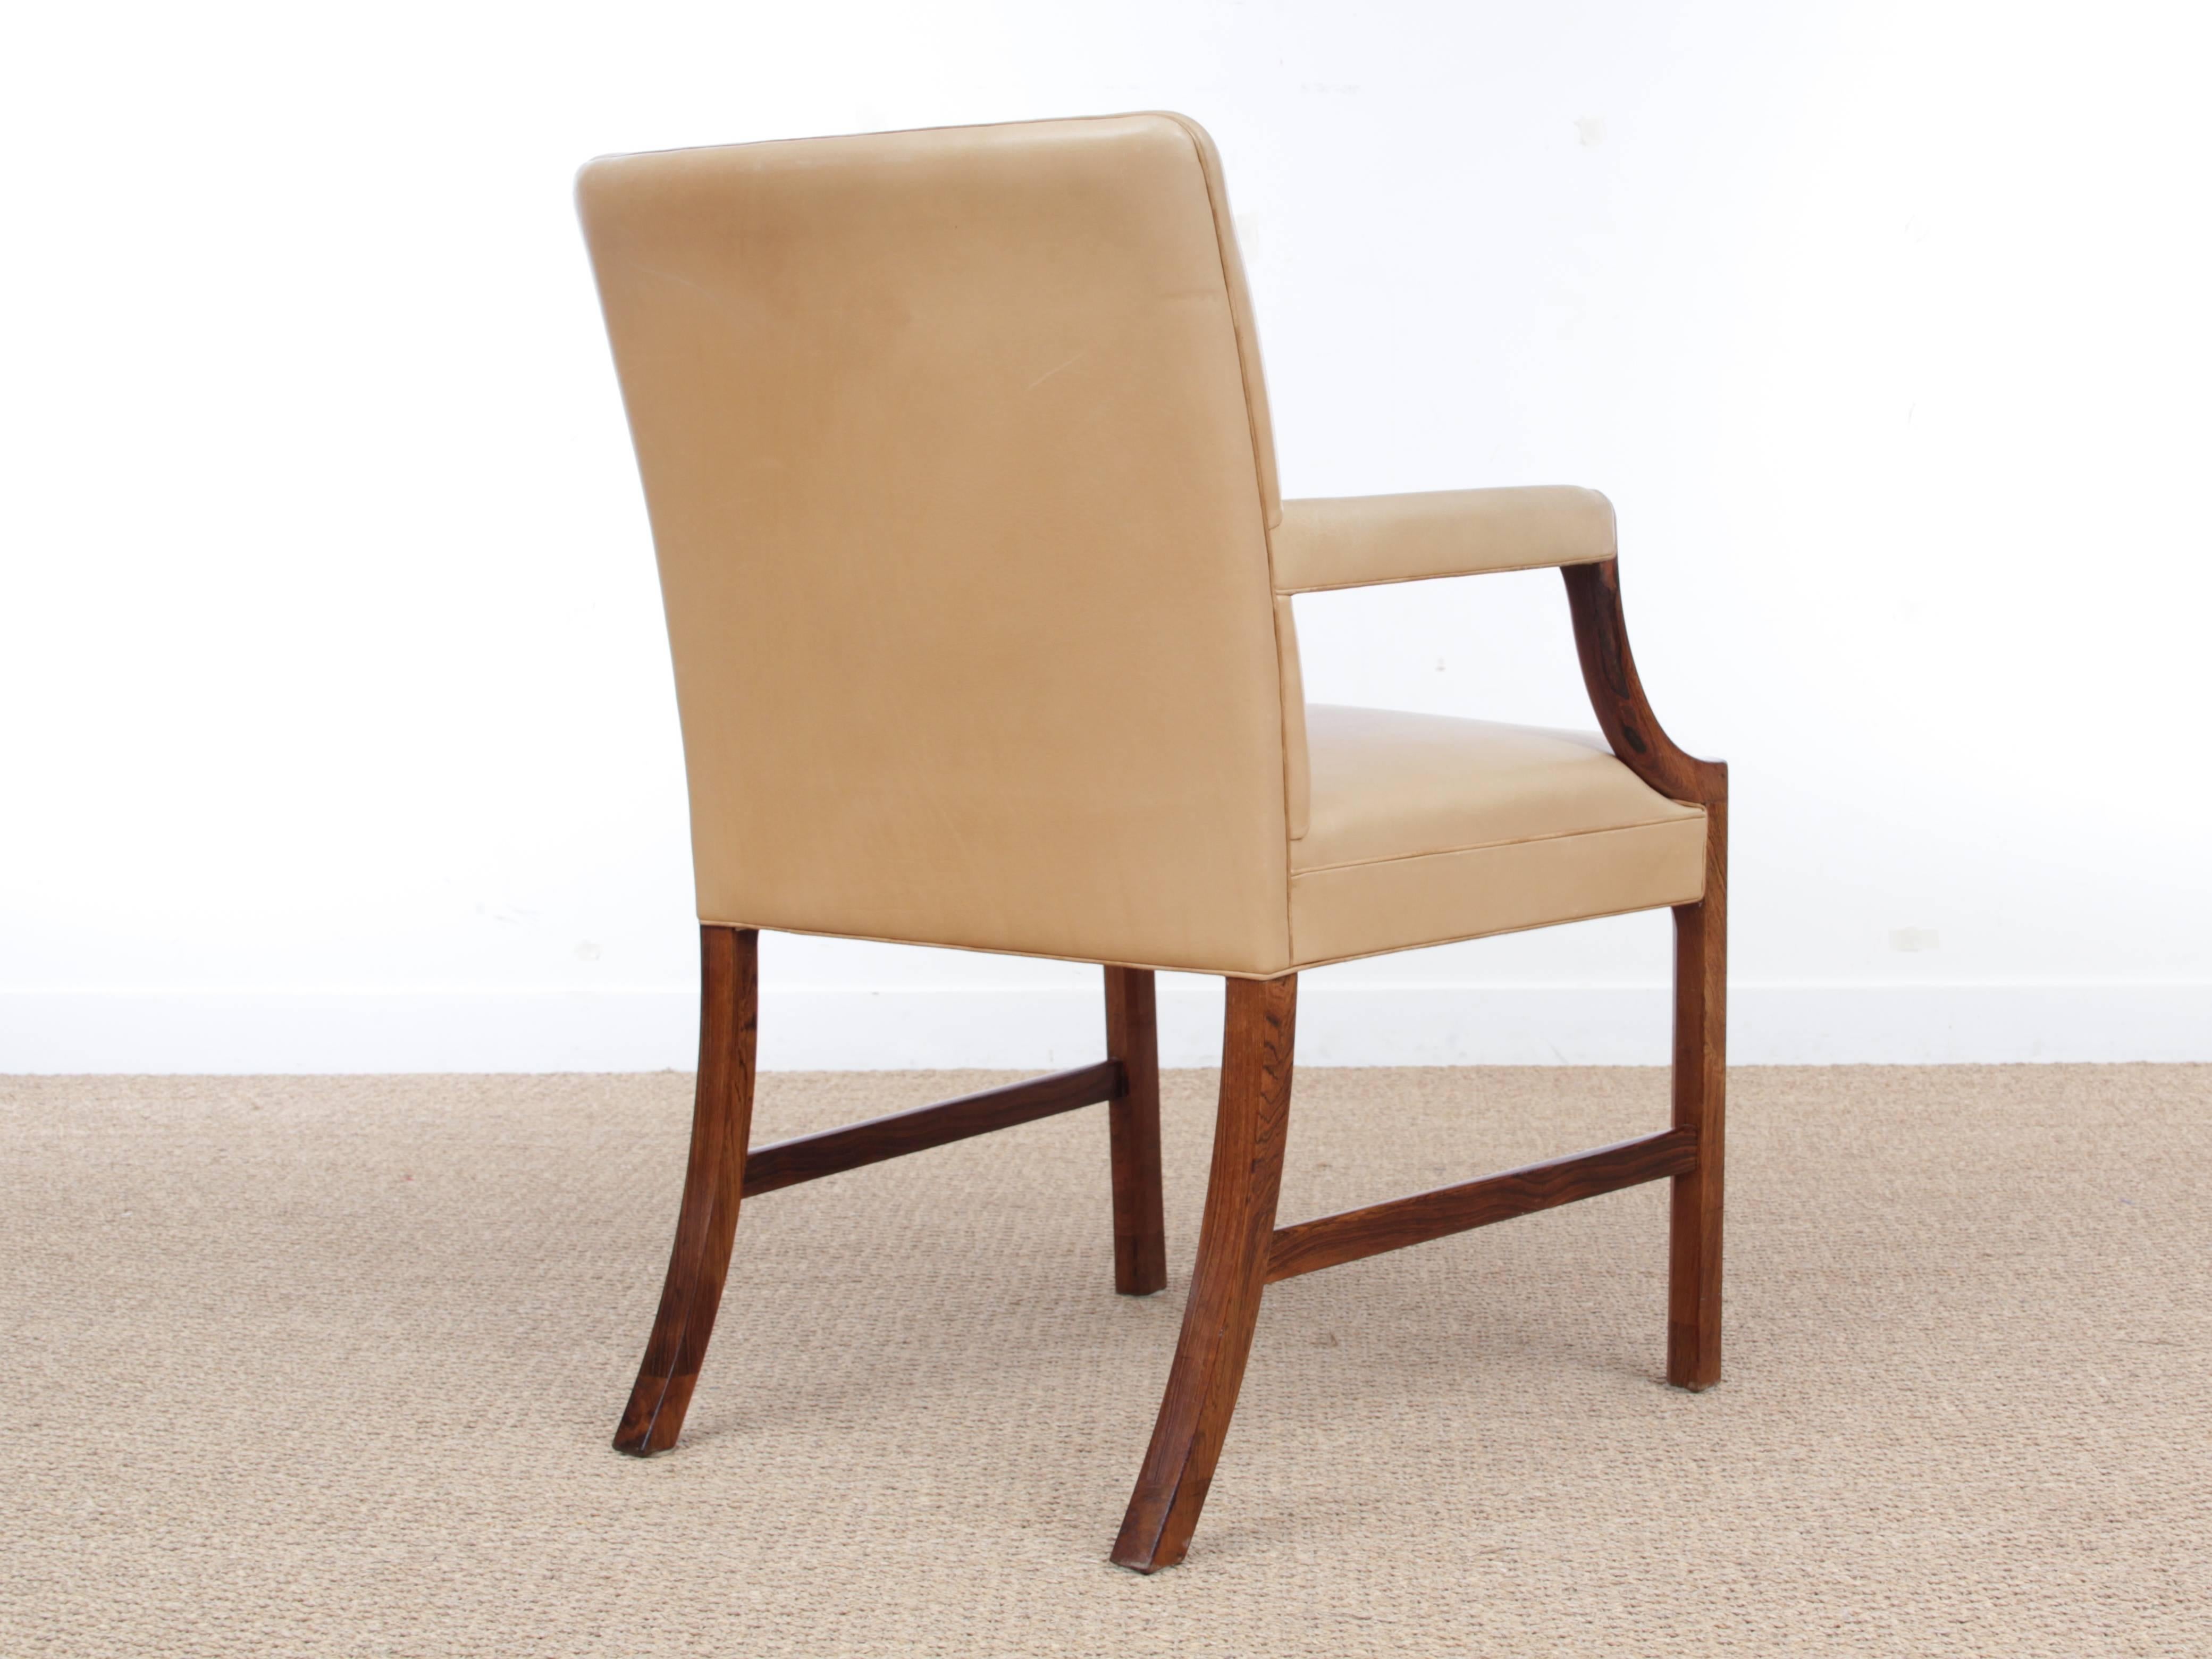 Mid-20th Century Mid-Century Modern Armchair by Ole Wanscher in Rosewood For Sale